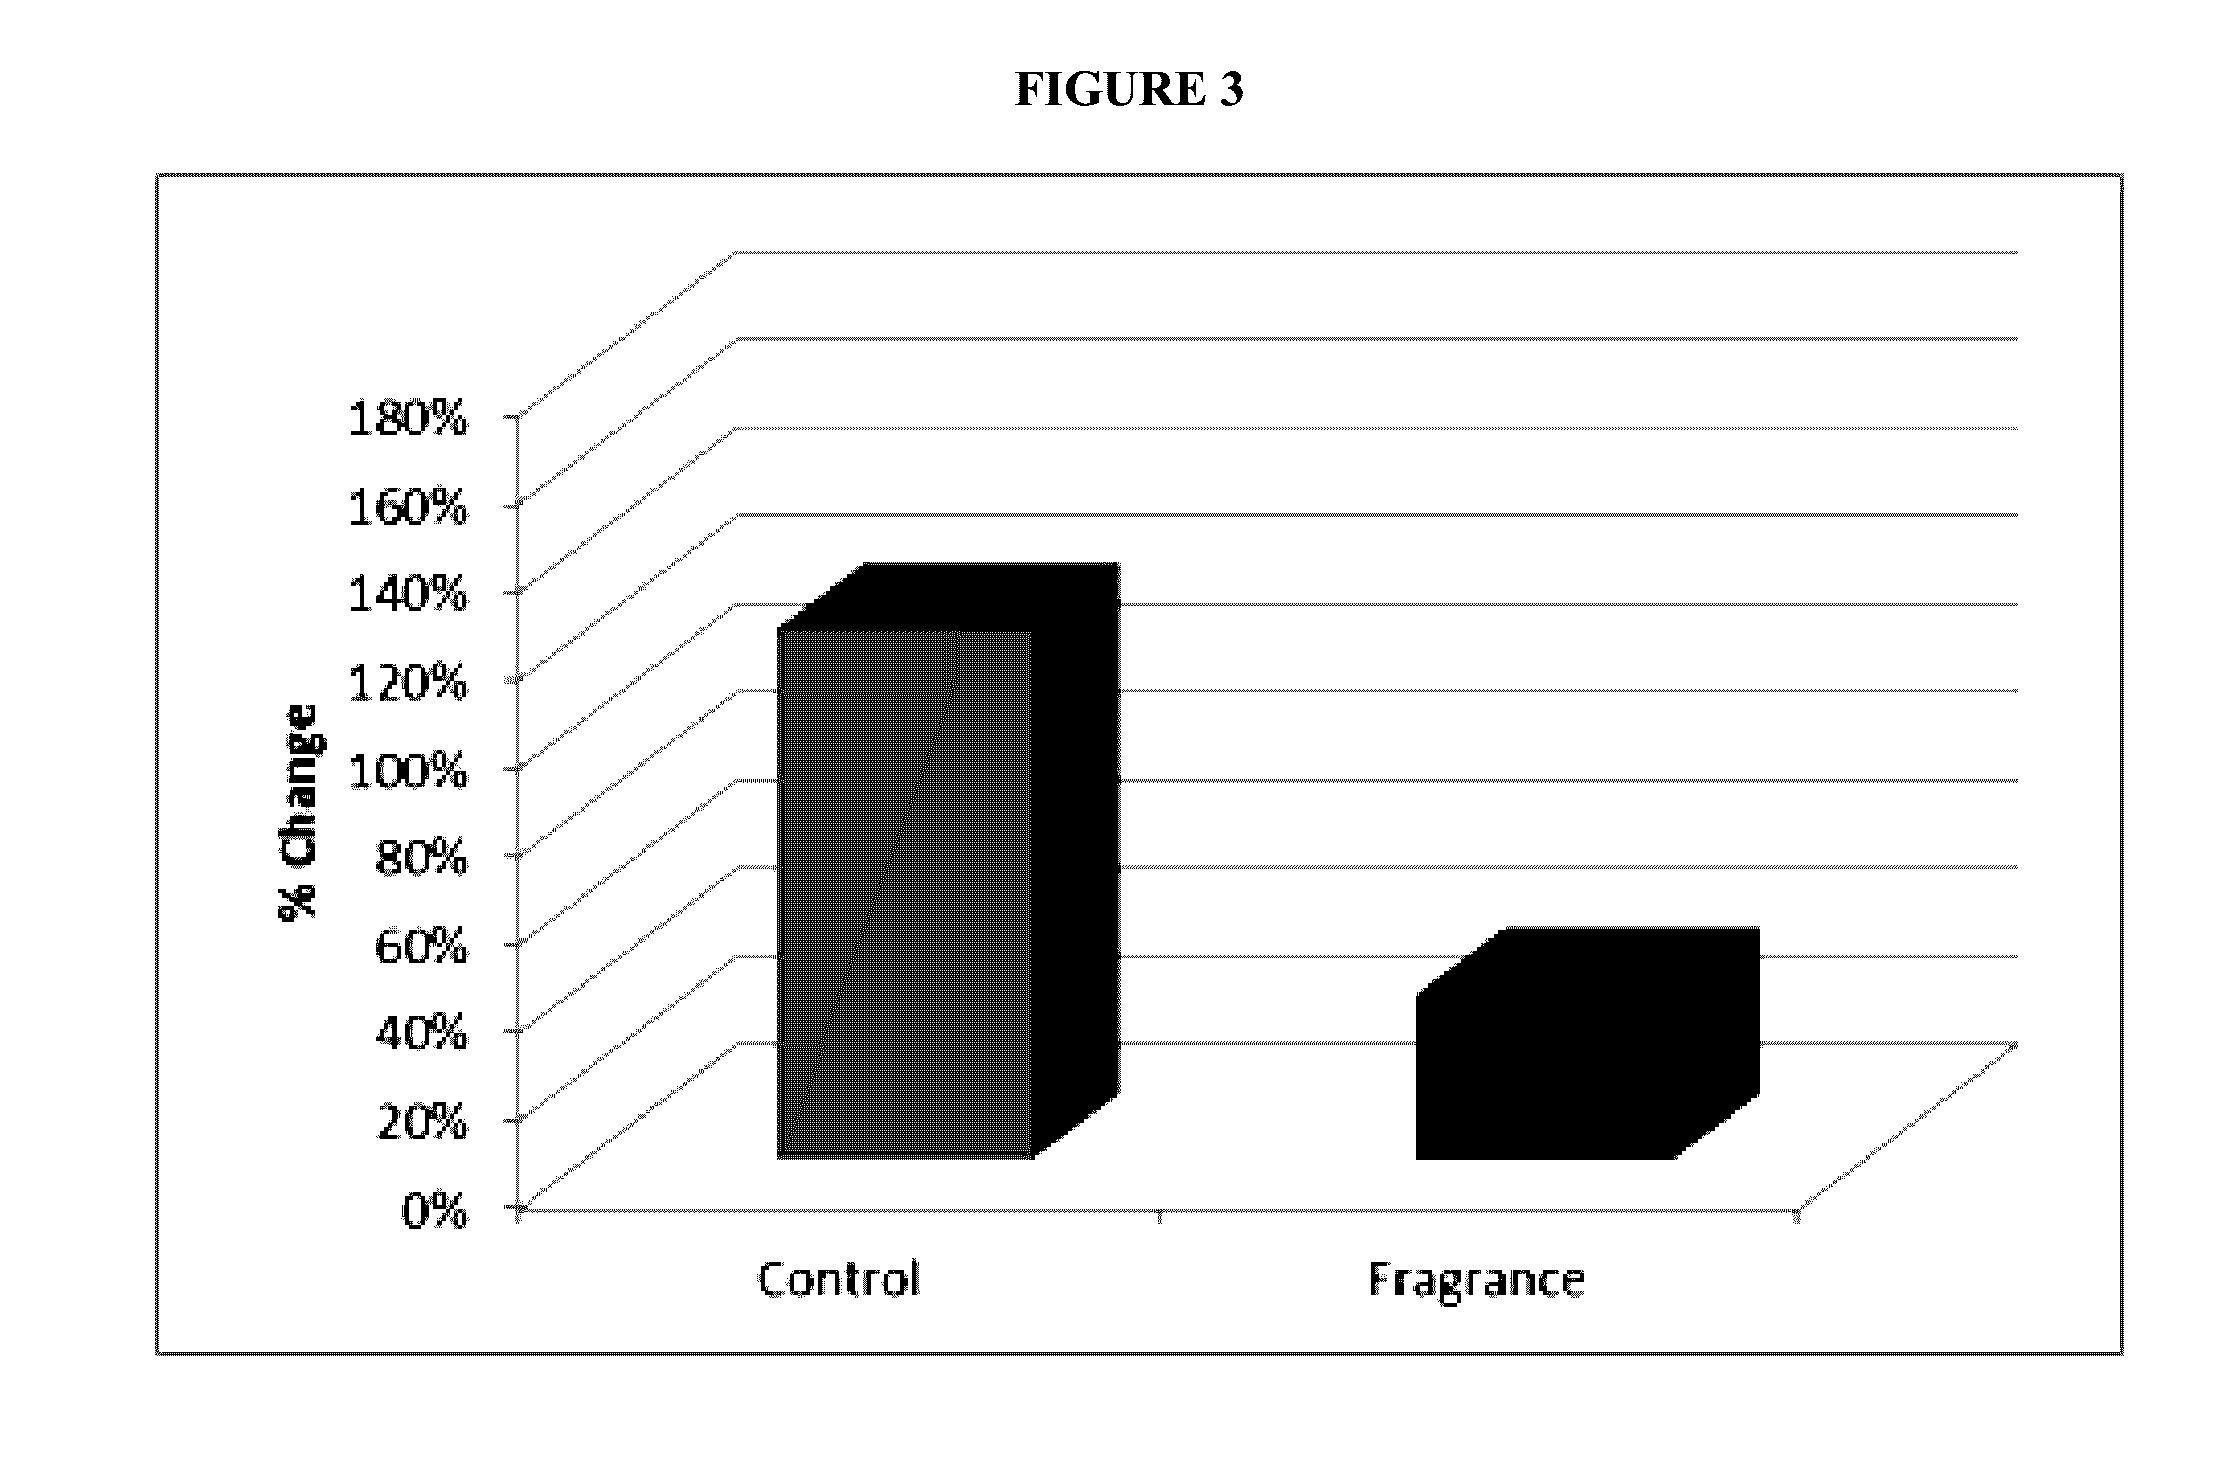 Musk compositions and methods of use thereof